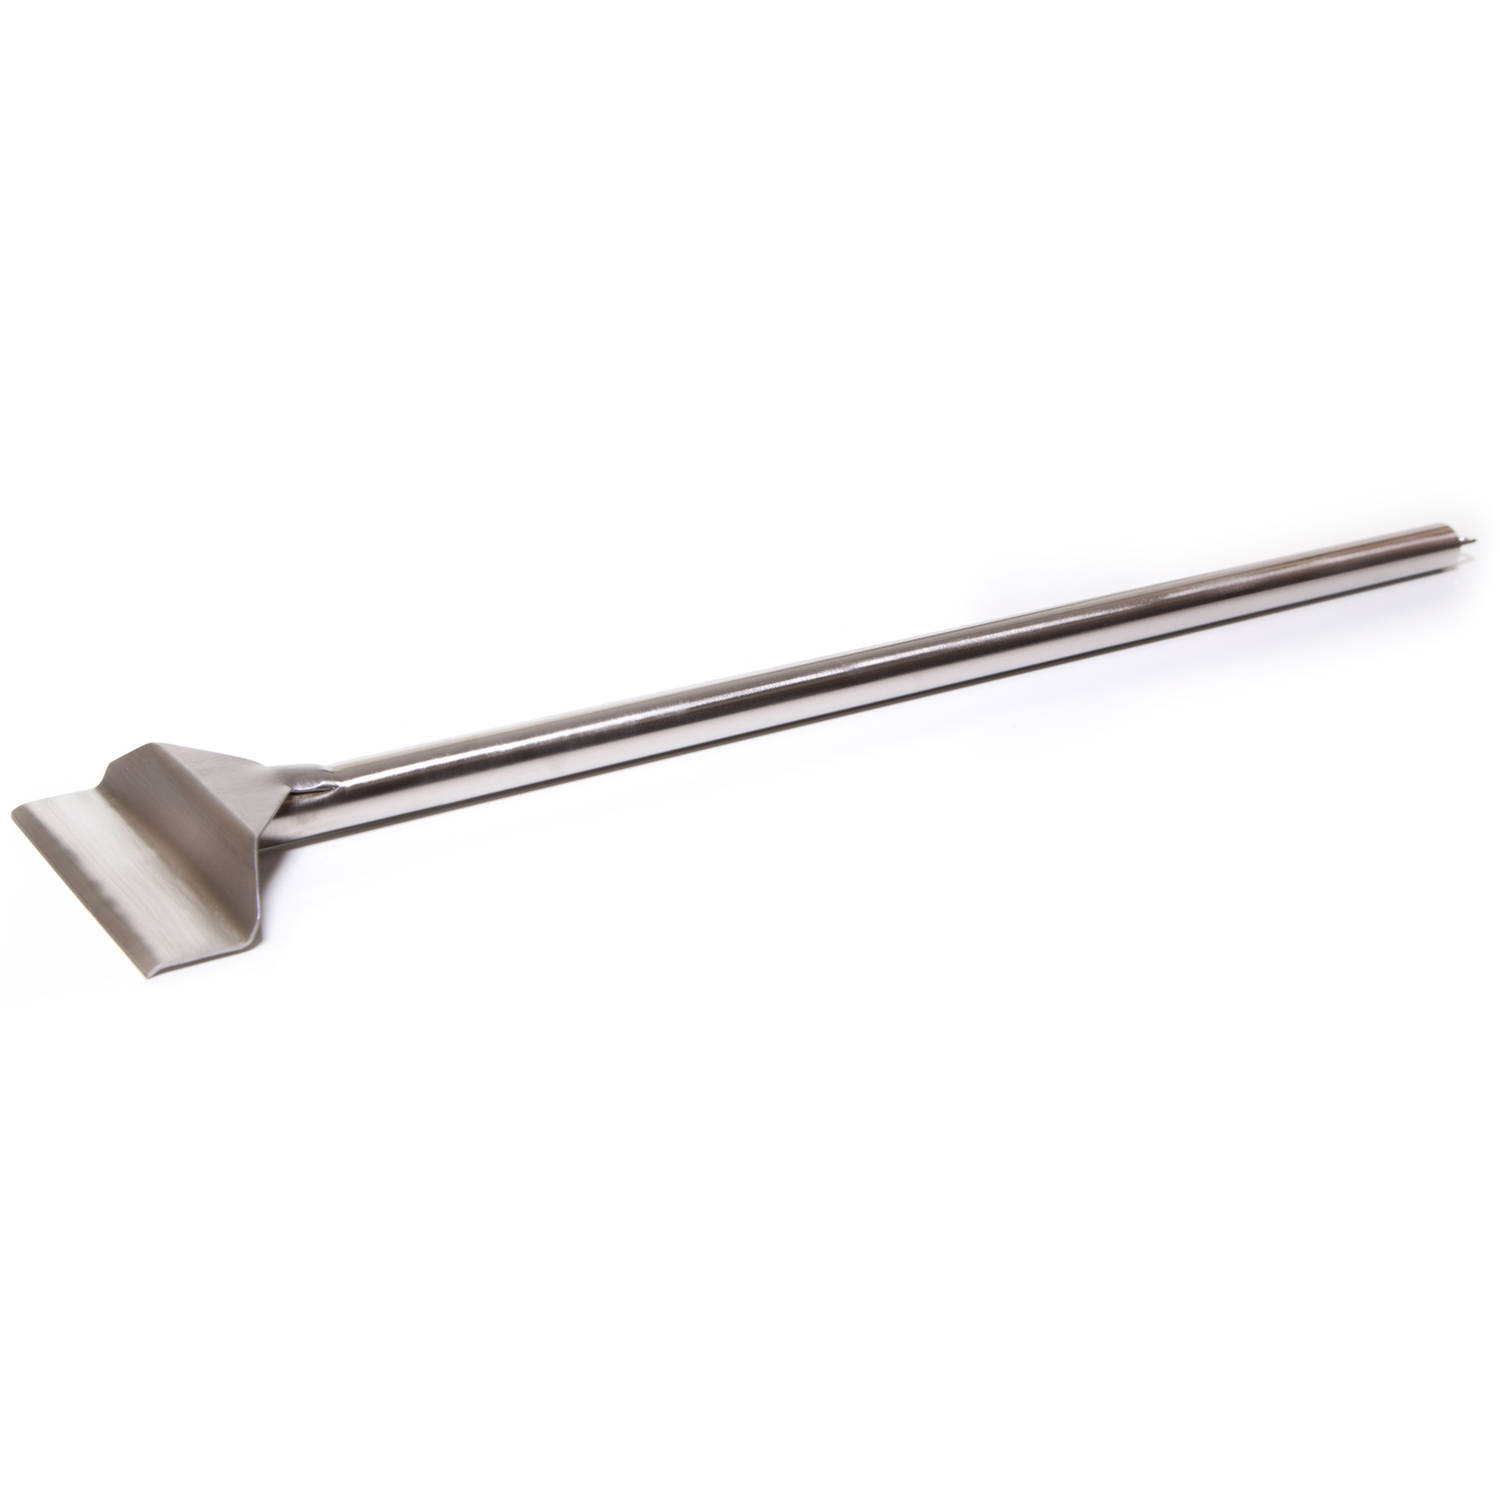 Camp Chef Scraper Cleaning Tool, Silver - image 1 of 2